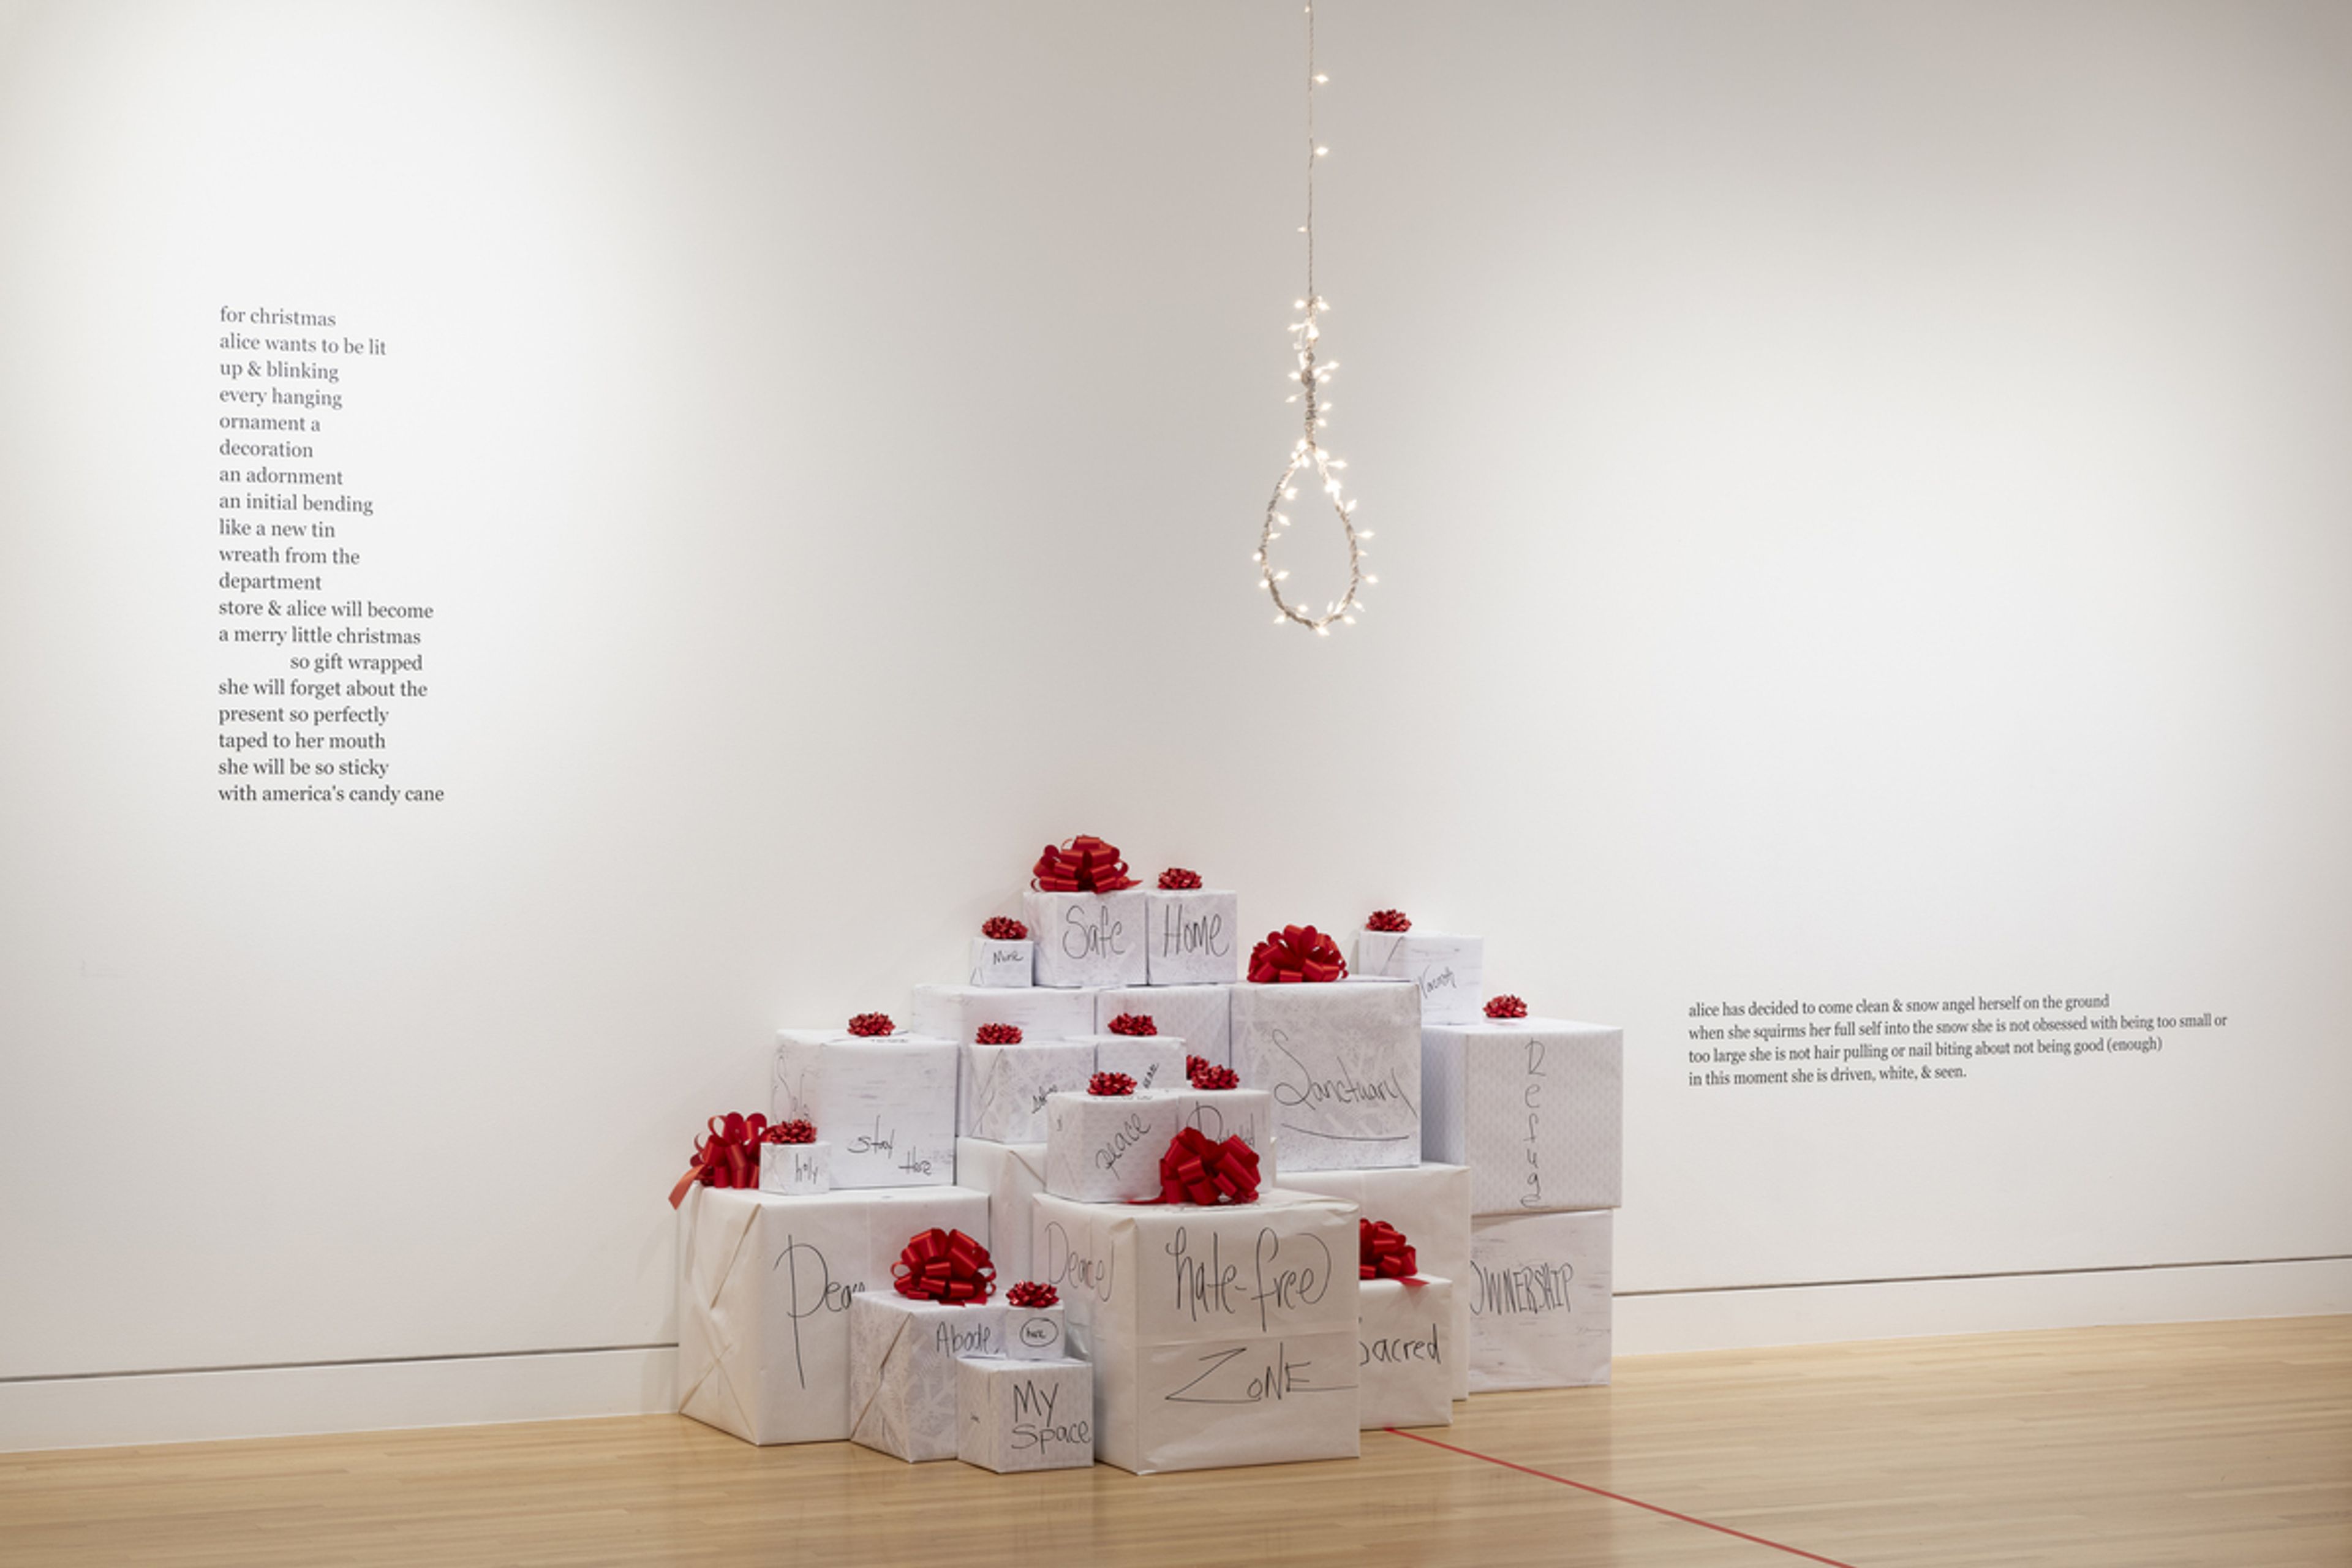 white boxes with red frills on top, a noose with string lights hangs above. A poem is written on the wall